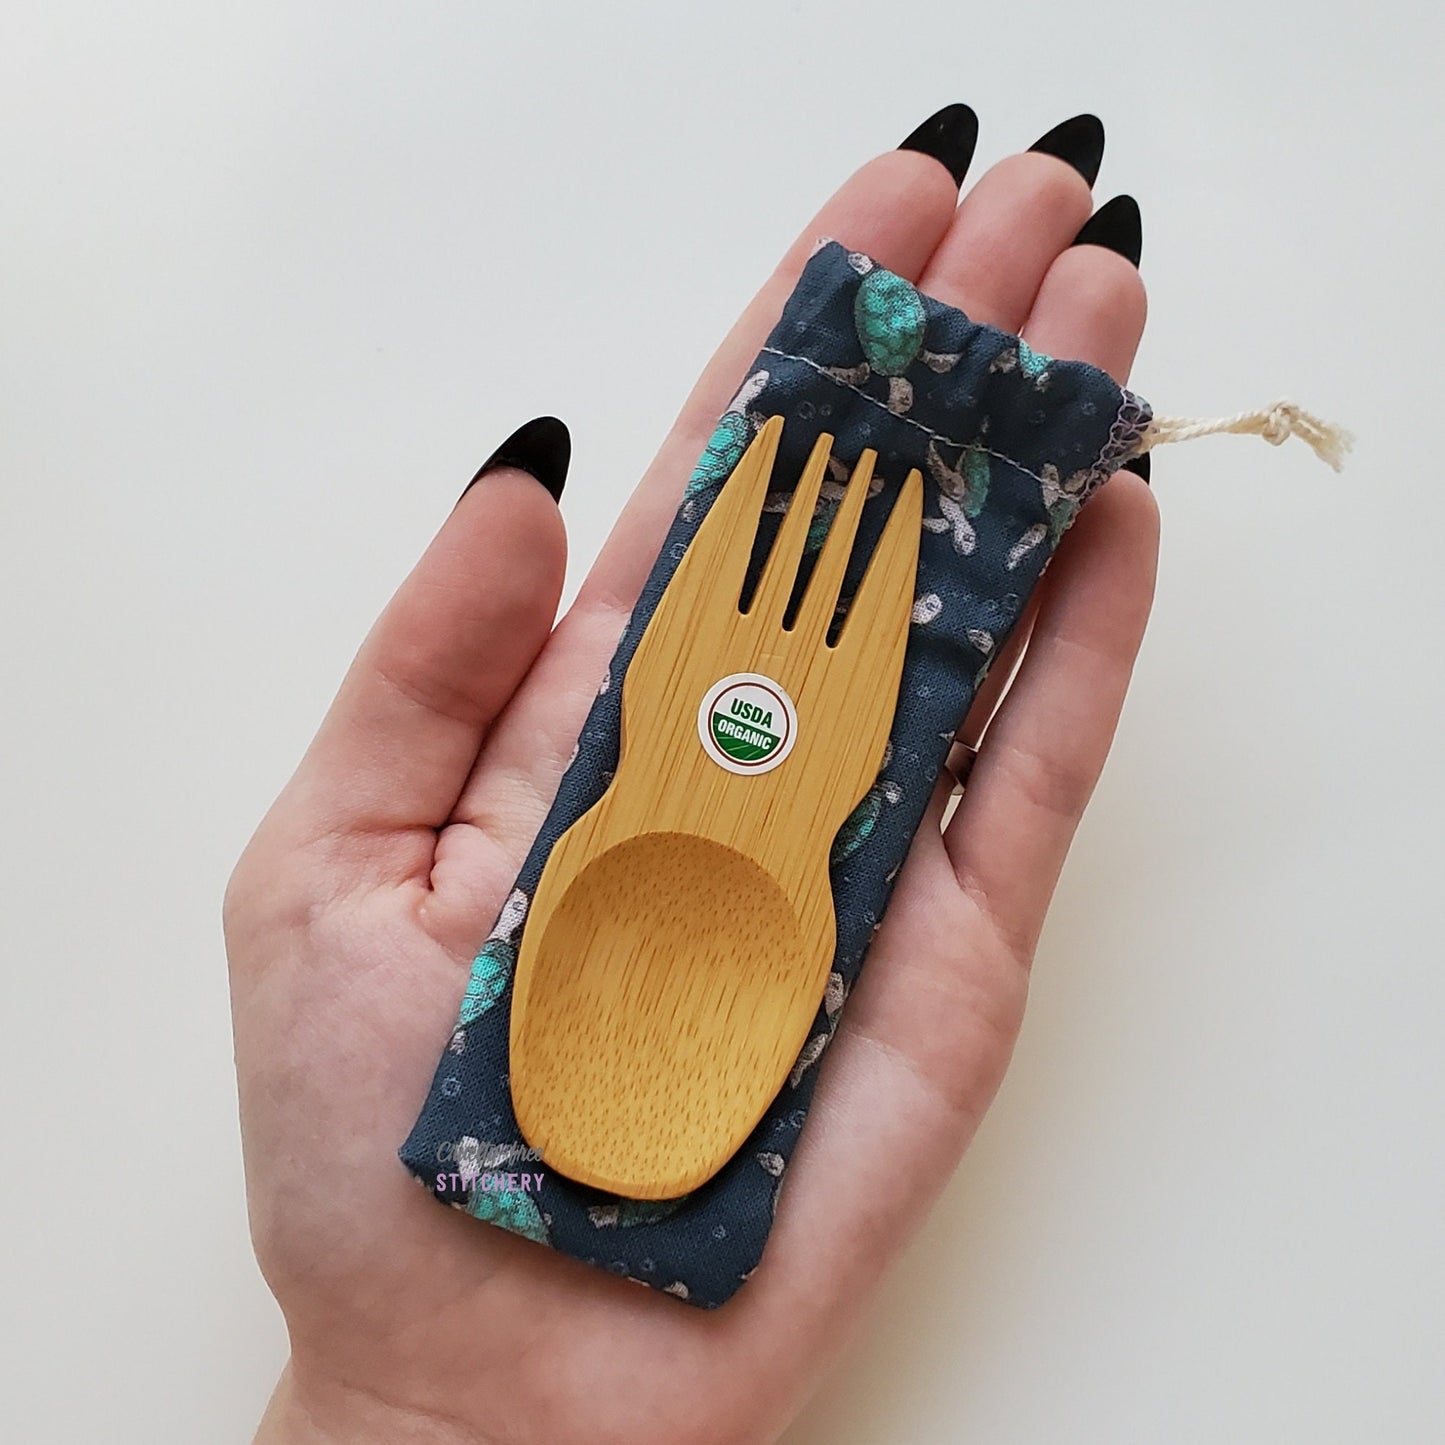 Reusable bamboo spork with pouch. Turtle print fabric pouch with bamboo spork on top, laid on a hand for size reference. The spork is slightly longer than the fingers.